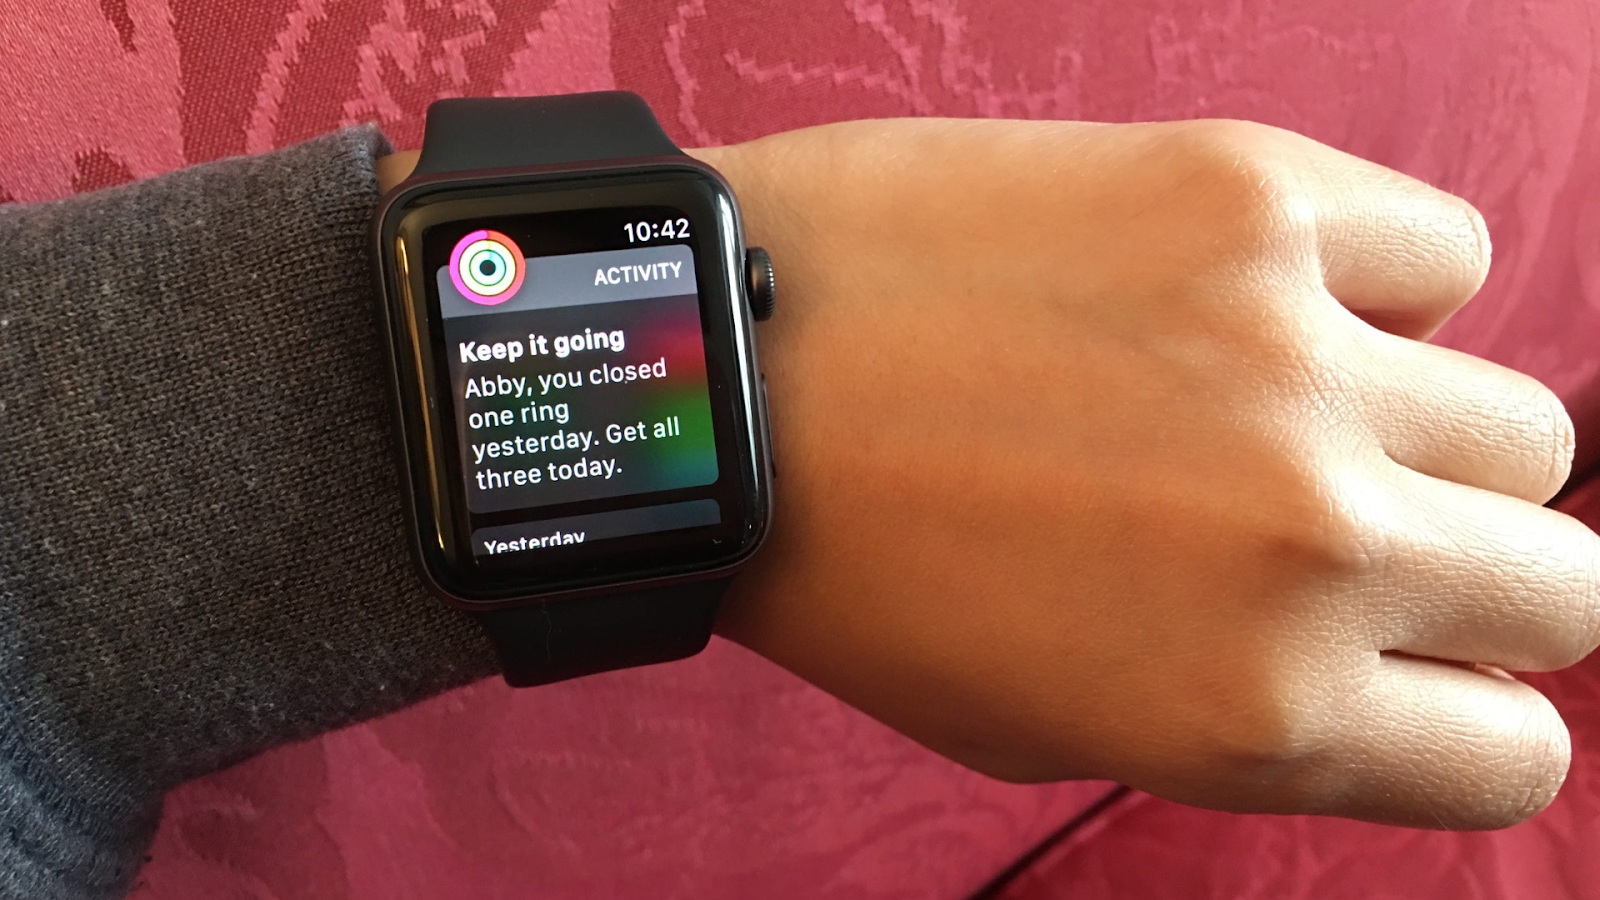 A smartwatch notification for a user-defined activity goal.